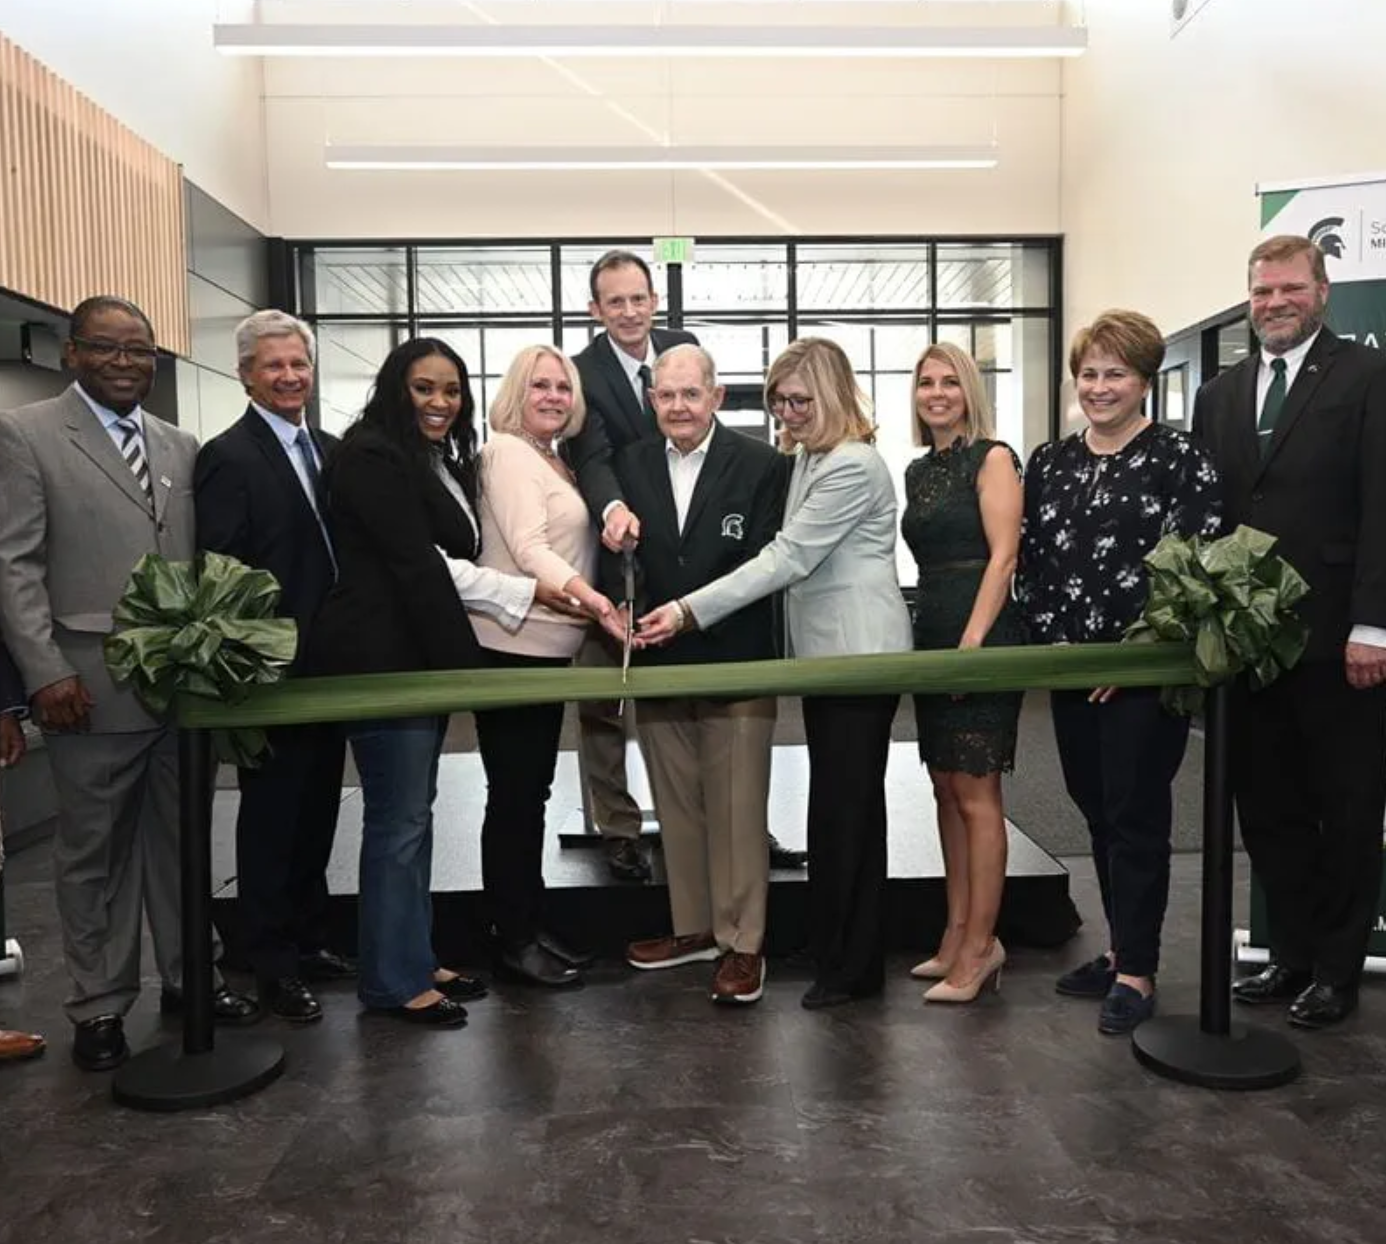 MSU celebrates opening of newly renovated School of Packaging building with ribbon cutting ceremony